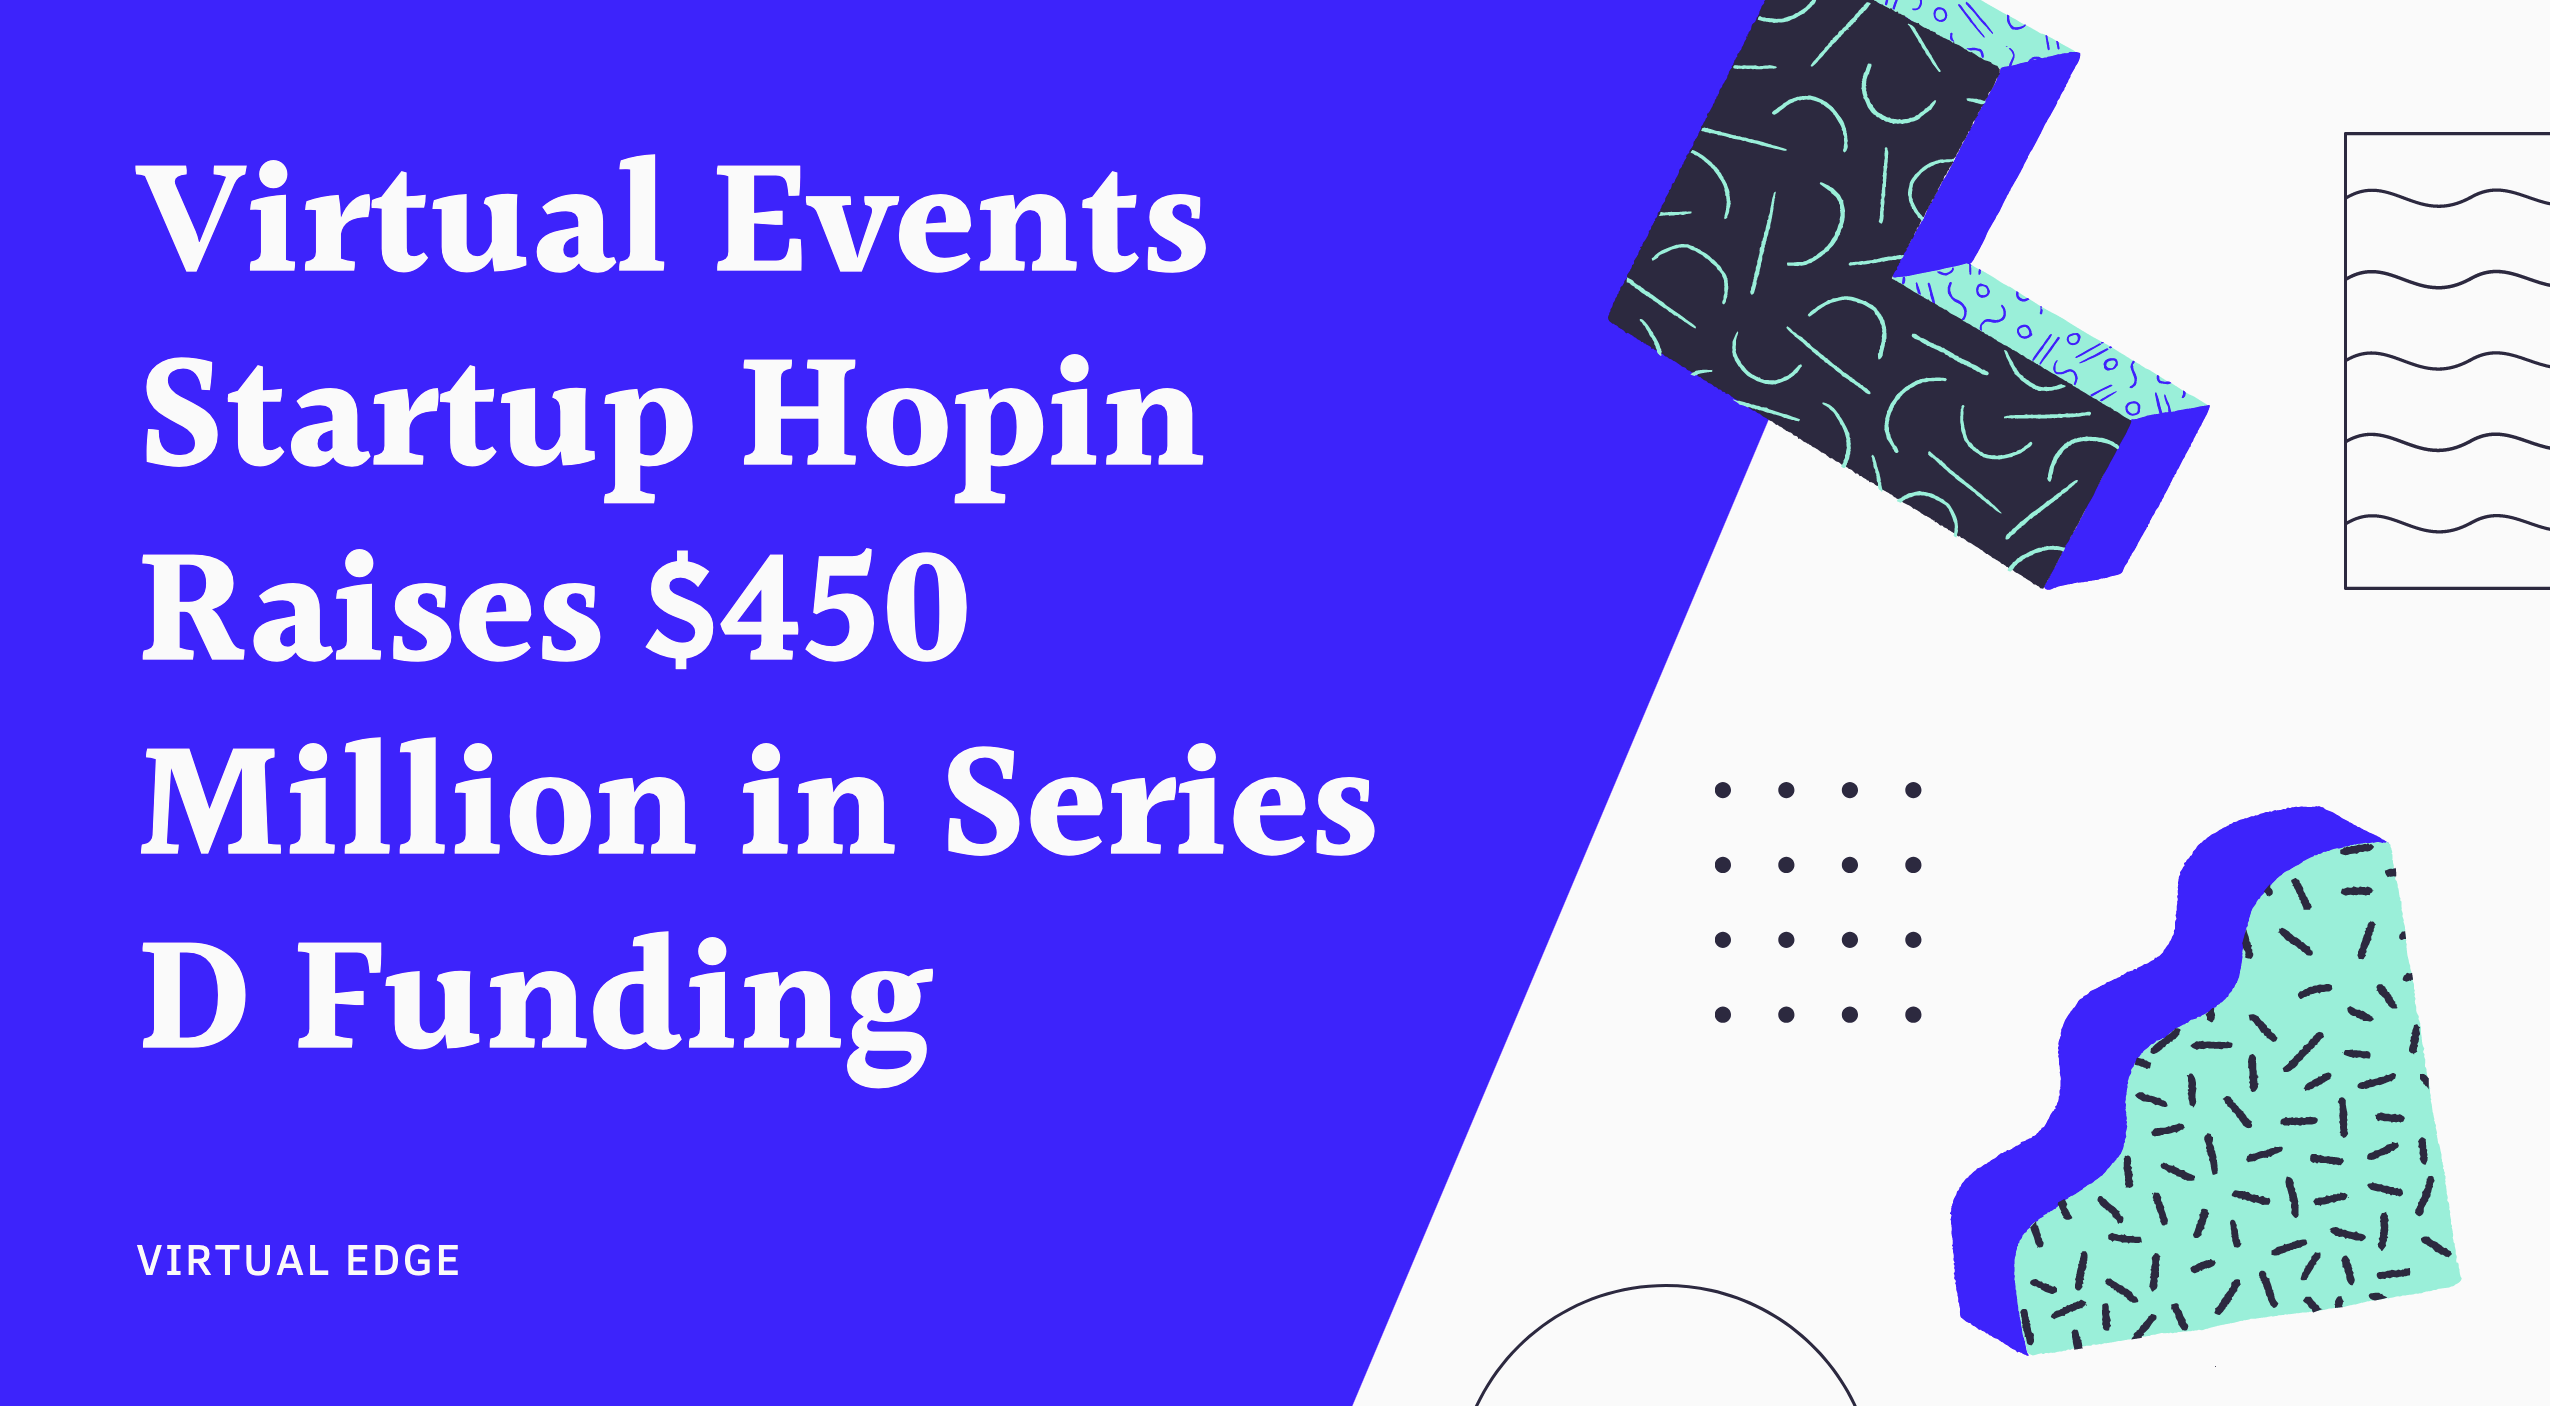 Virtual Events Startup Hopin Raises $450 Million in Series D Funding